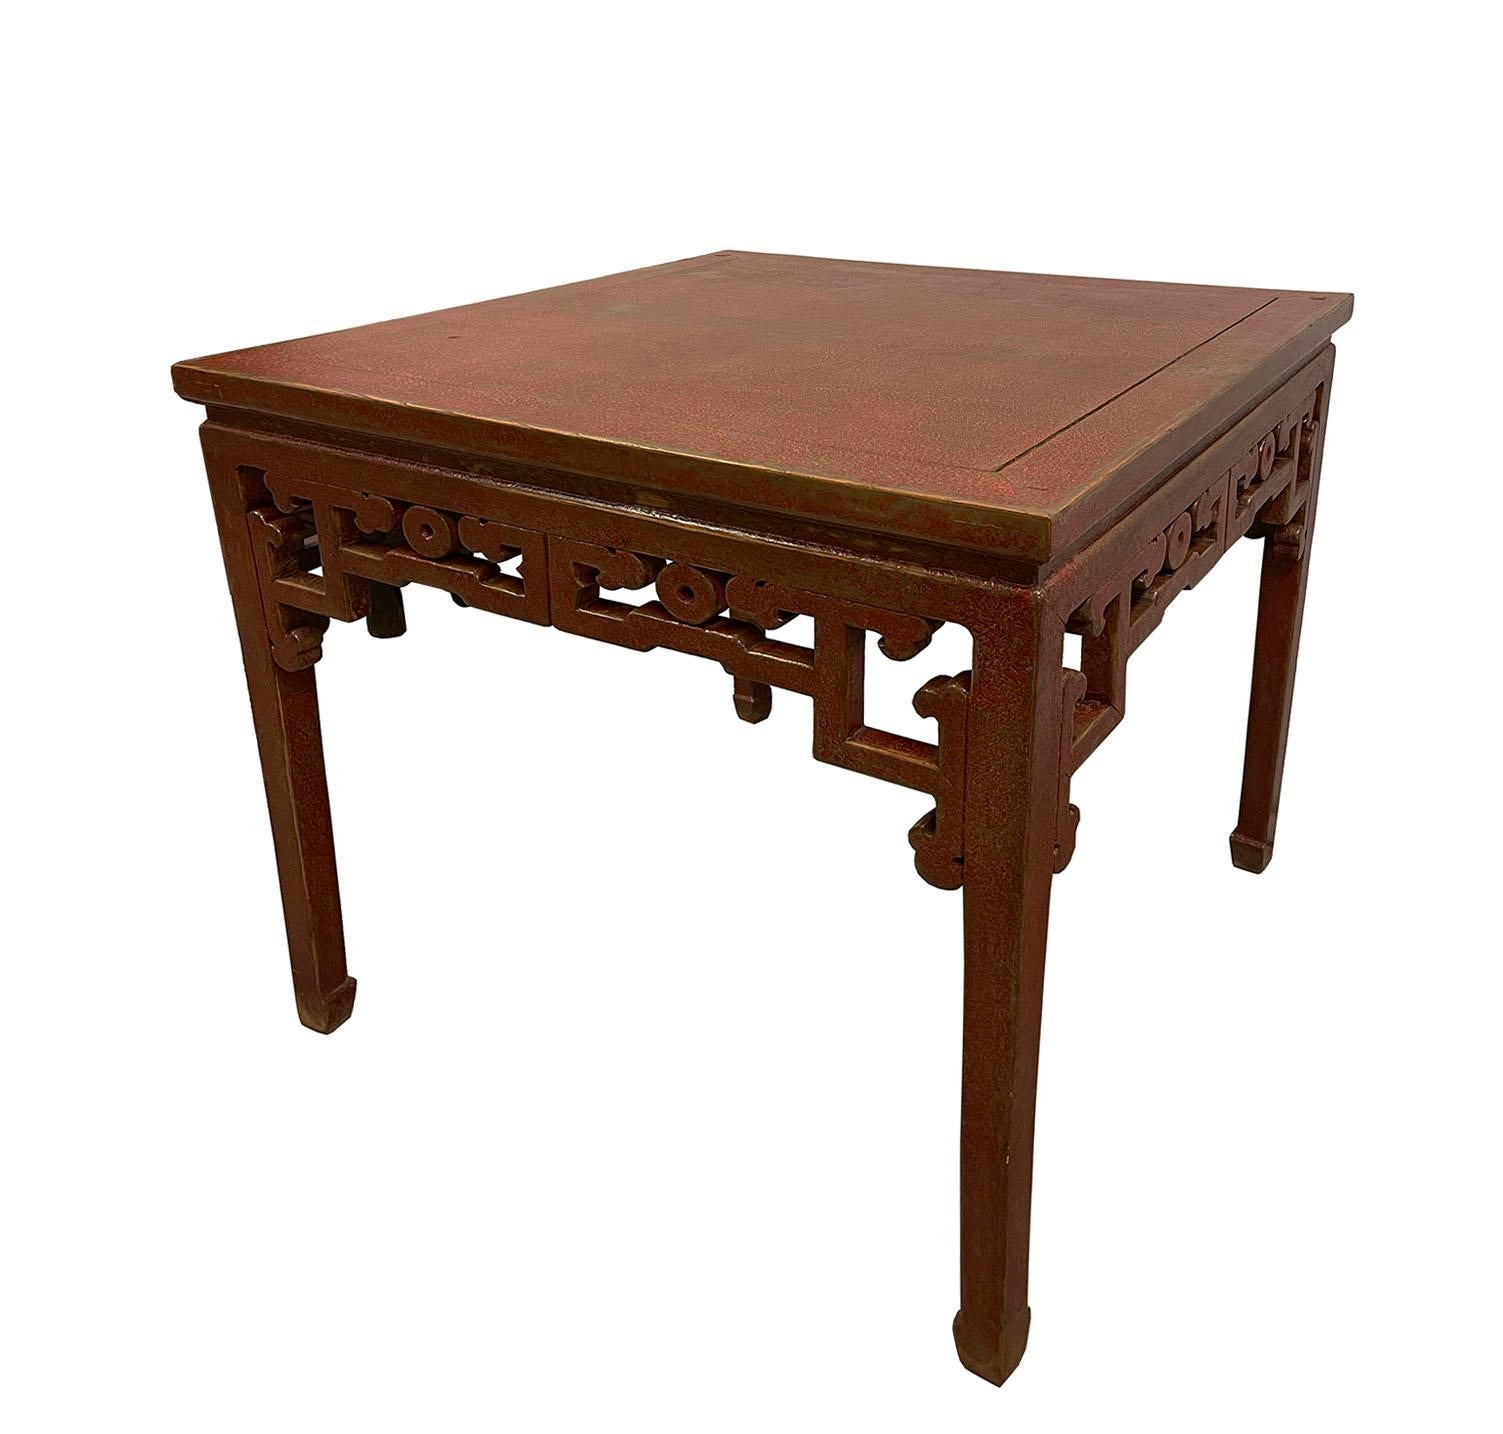 Up for your consideration is a gorgeous Chinese square dining table, also know as 